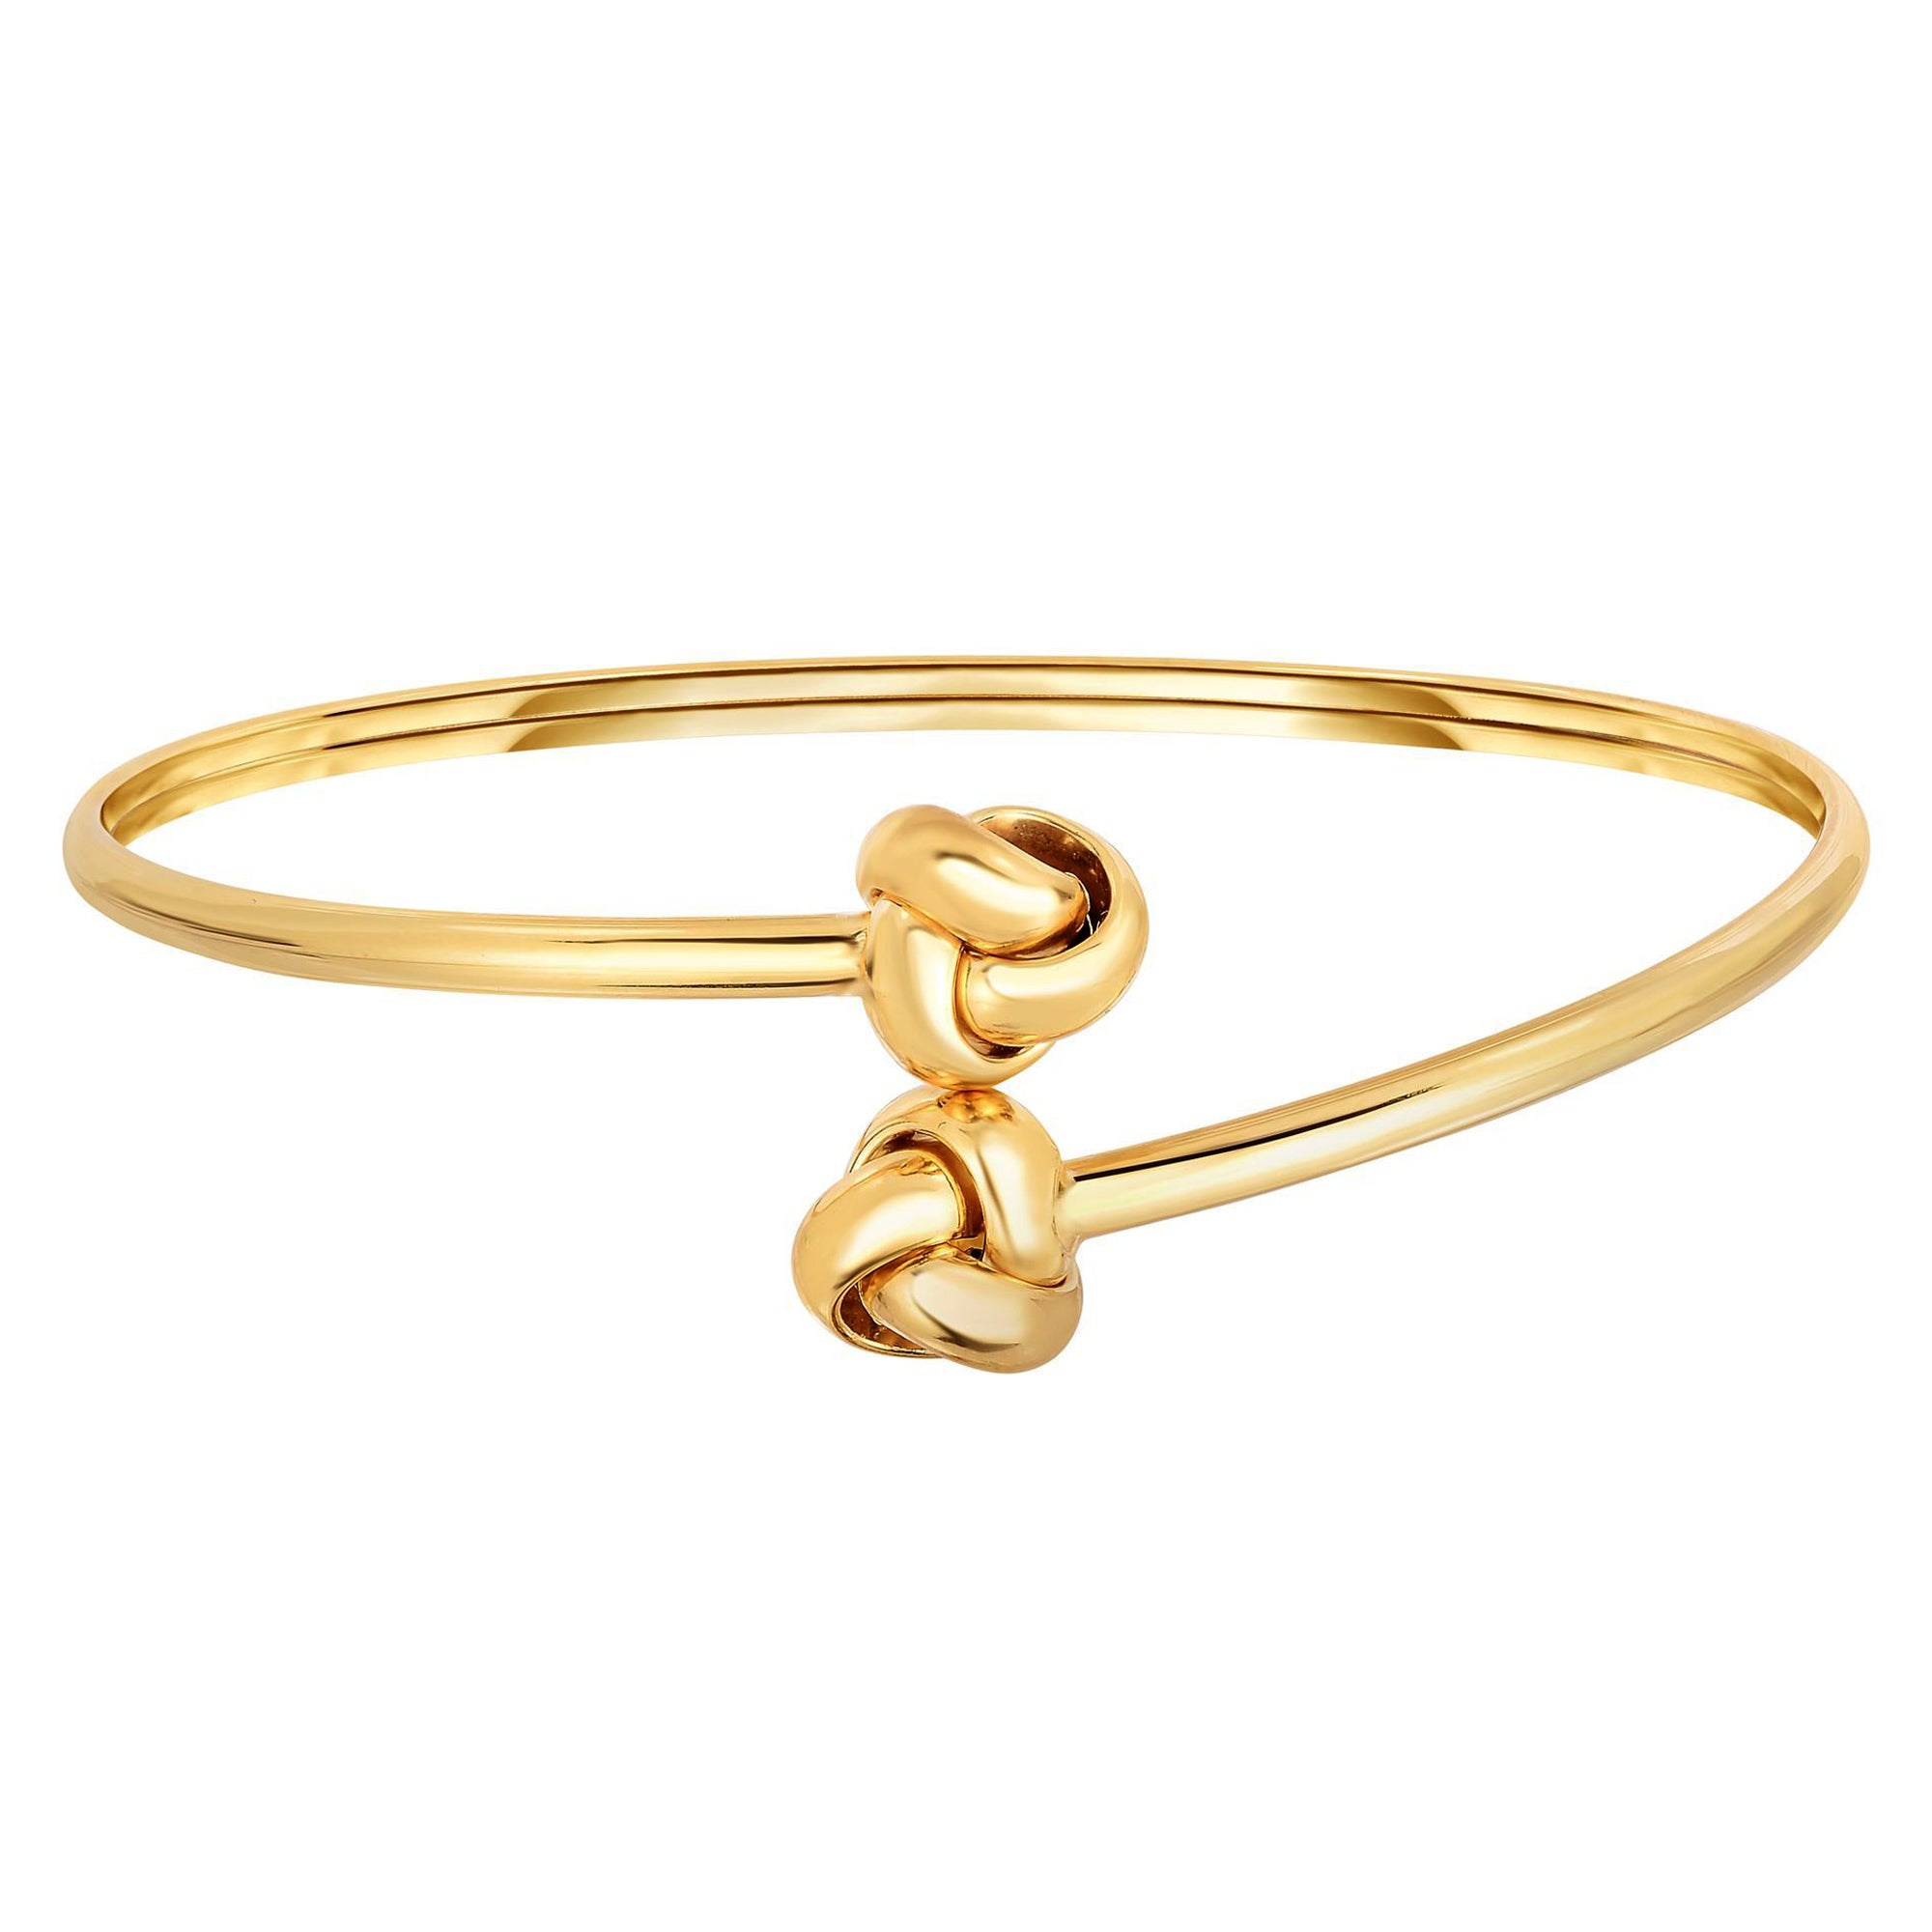 14k Yellow Gold Shiny Double Love Knot Tip Fancy Bypass Fancy Bangle, 7.25" fine designer jewelry for men and women